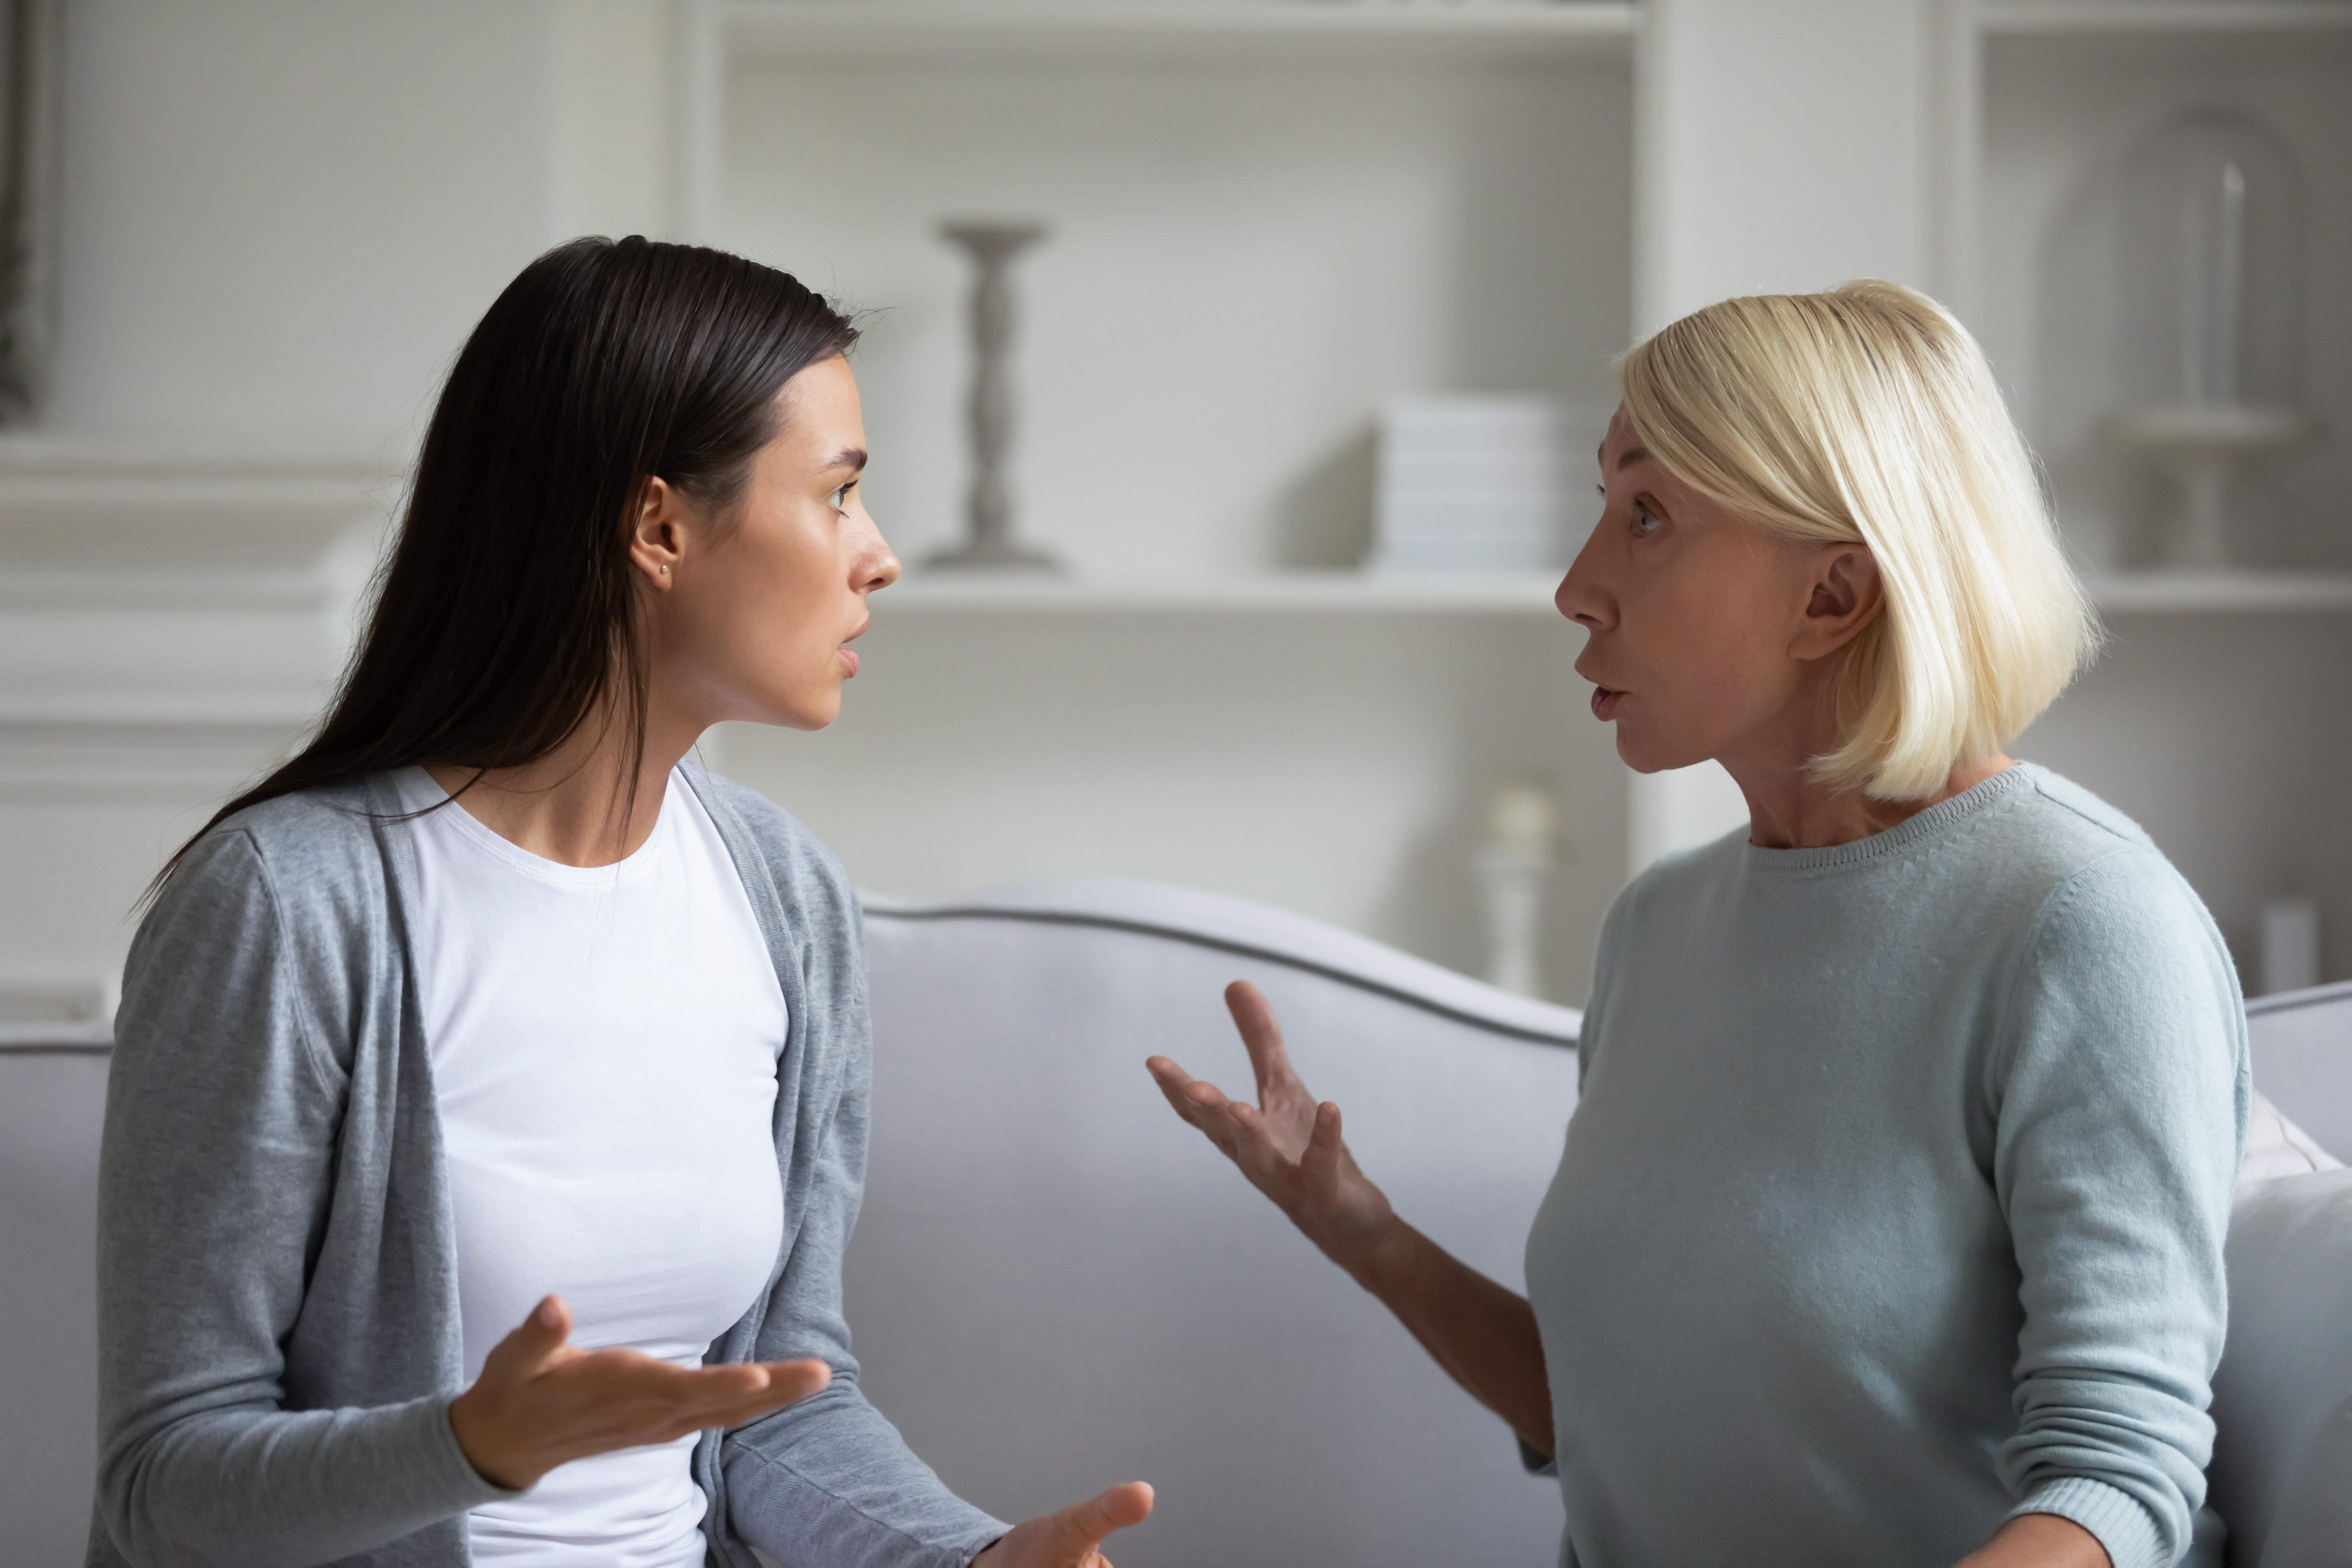 Senior mom and her daughter arguing | Source: Shutterstock